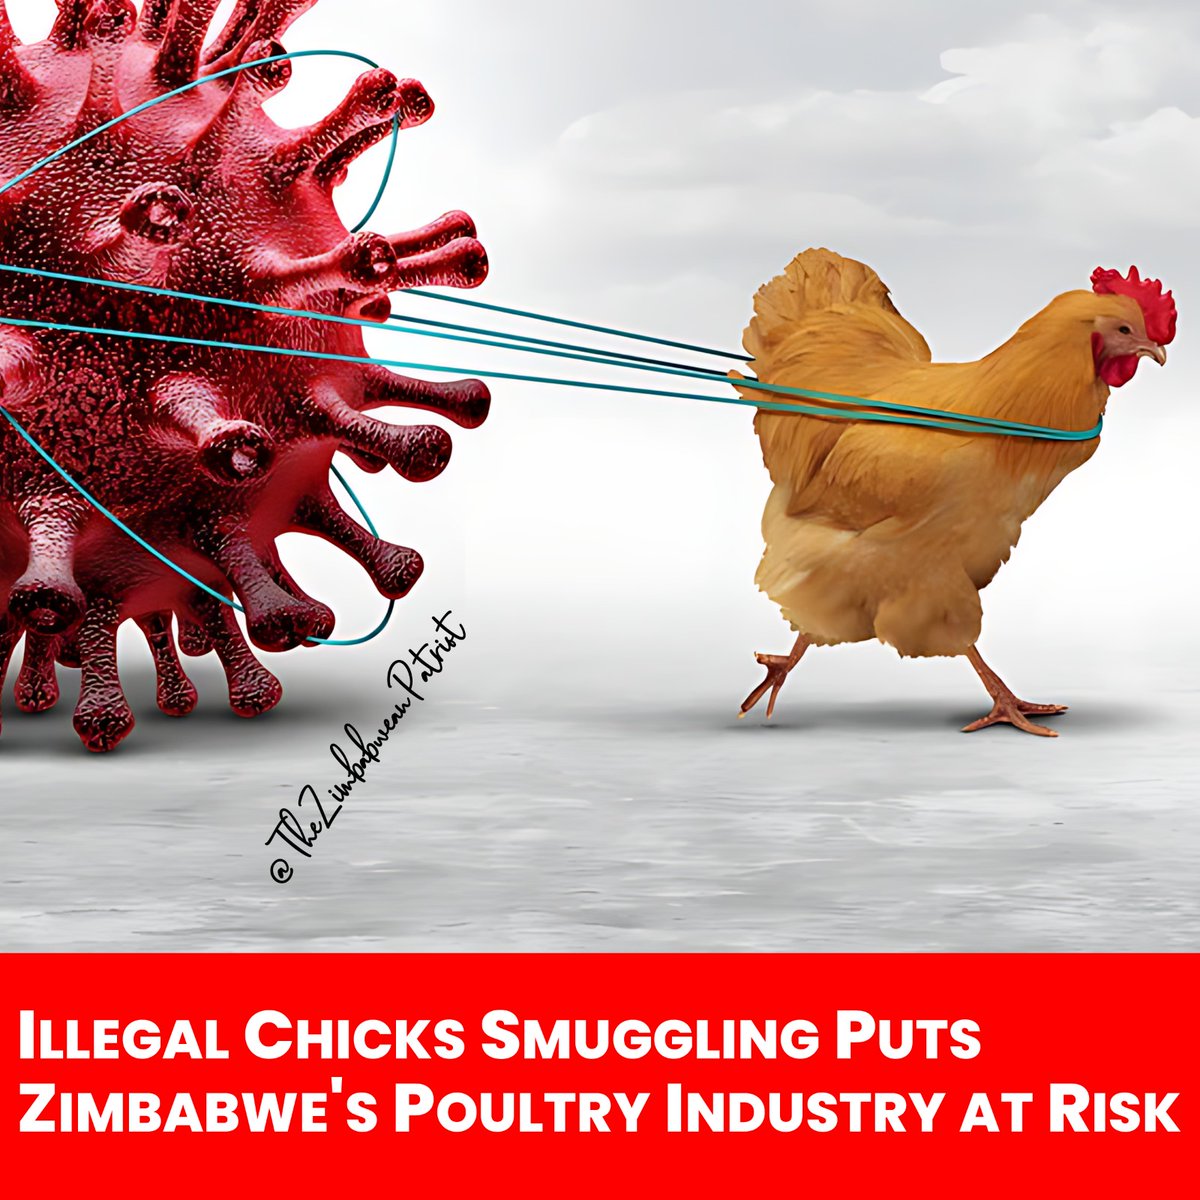 ALARMING: 15,000 boxes of day-old chicks smuggled into Zimbabwe from Mozambique!
This illegal activity puts our poultry industry at risk of disease outbreaks, including Avian flu. Let's take action and support legal and sustainable farming practices, towards #Vision2030